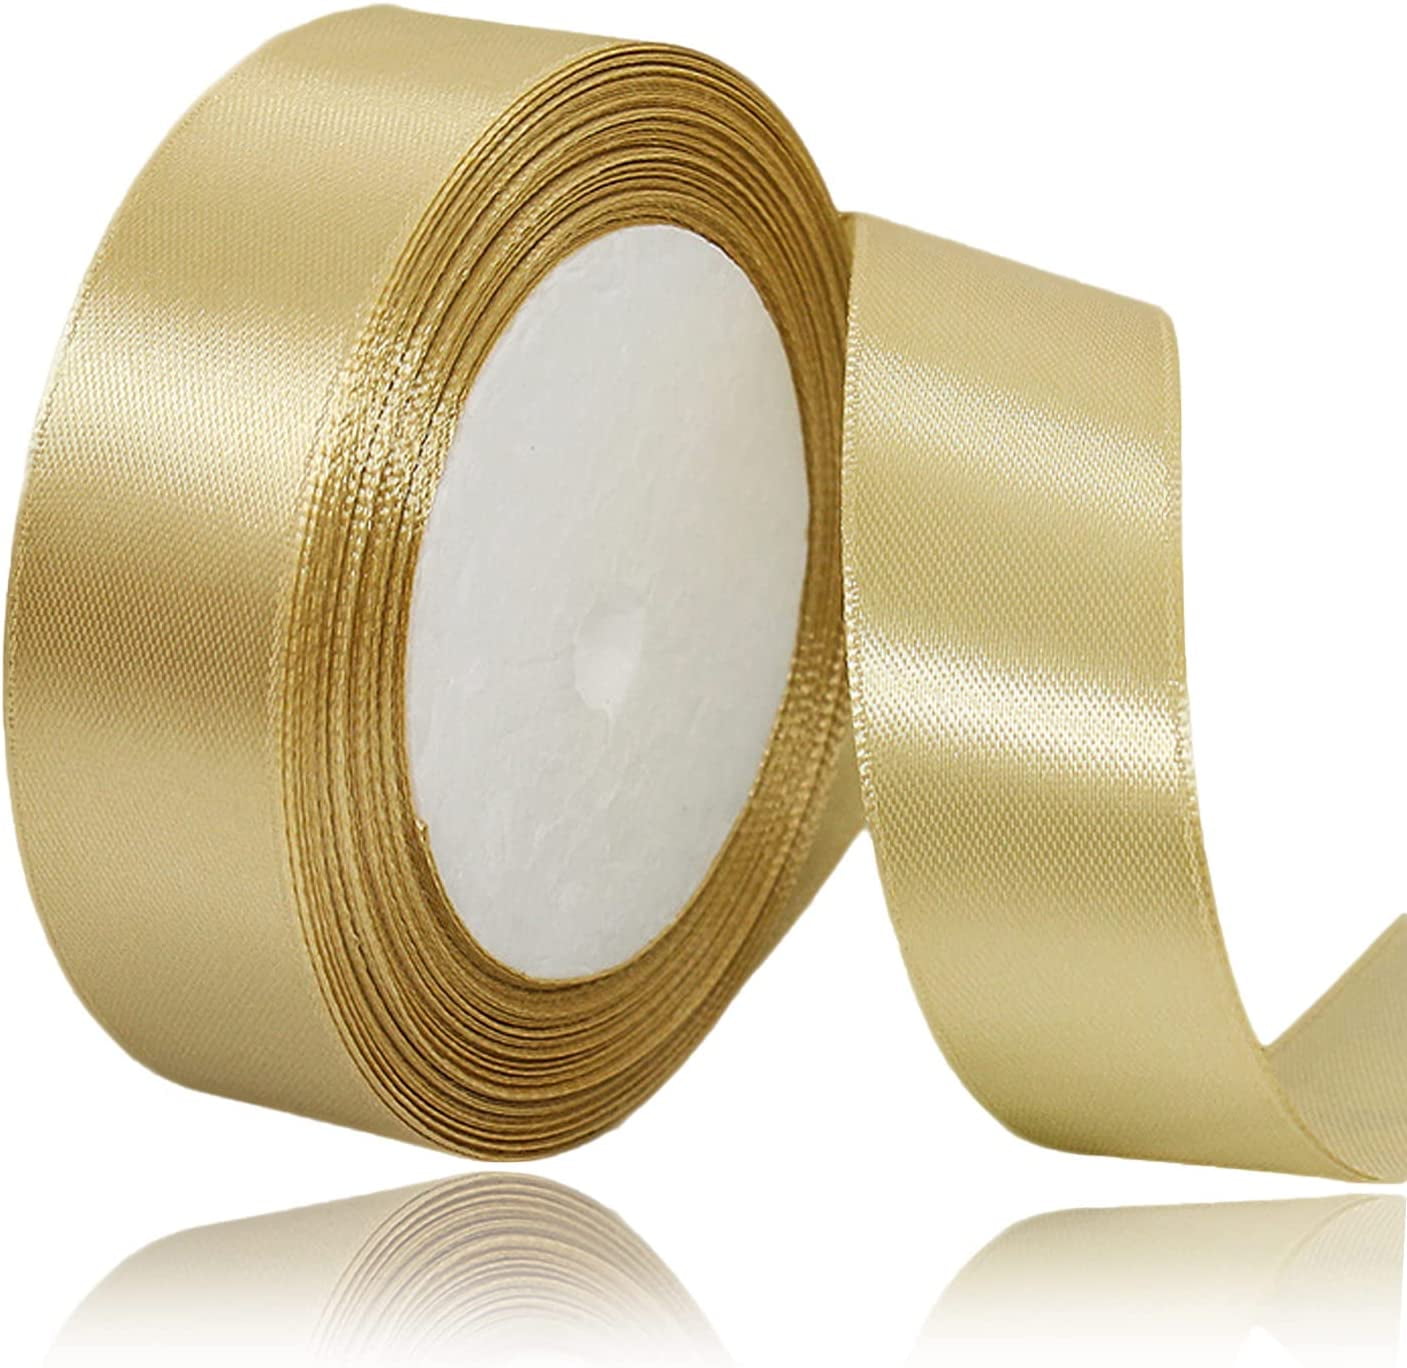 1.5 Inch (5 YDS) Wired Christmas Ribbon Gold w/Gold Trim Gift Wrap Bows  Wreaths